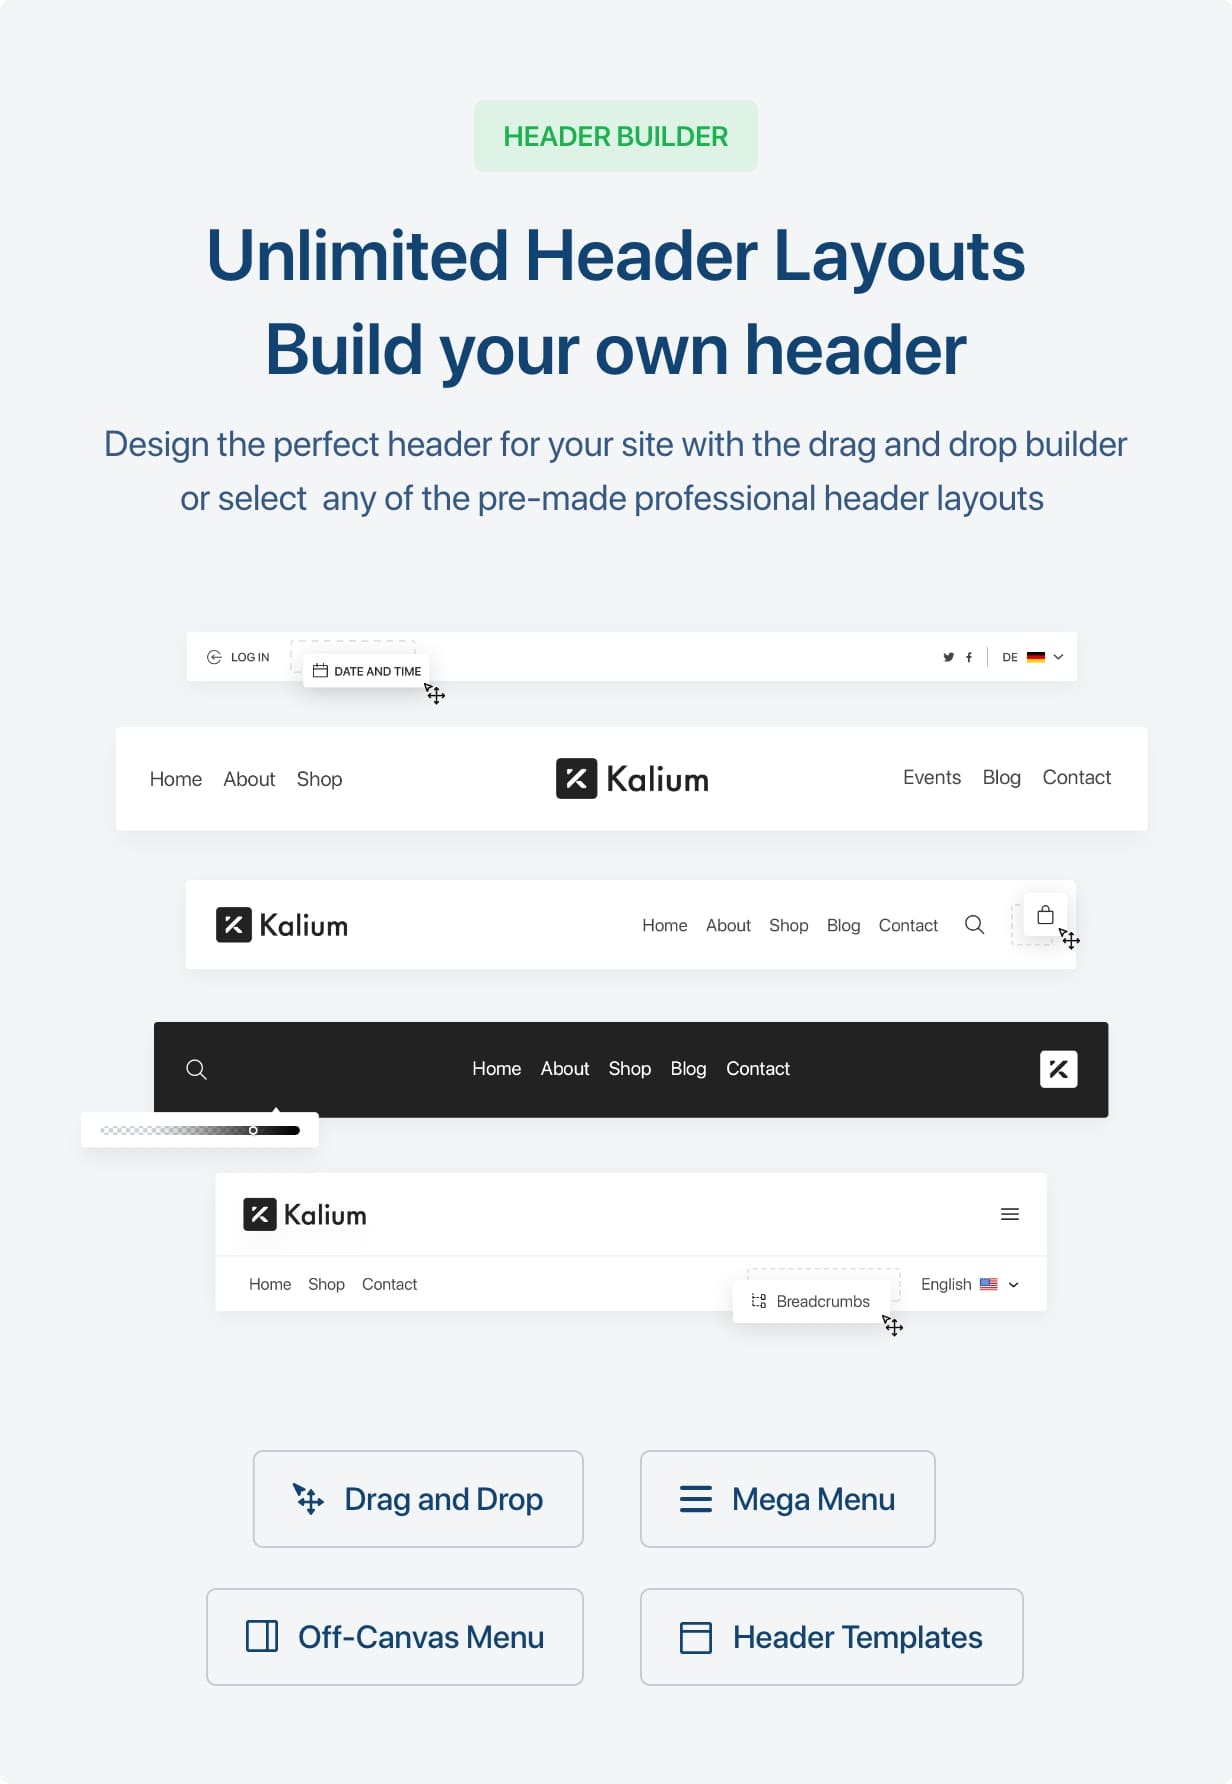 Unlimited Header Layouts to build your own header